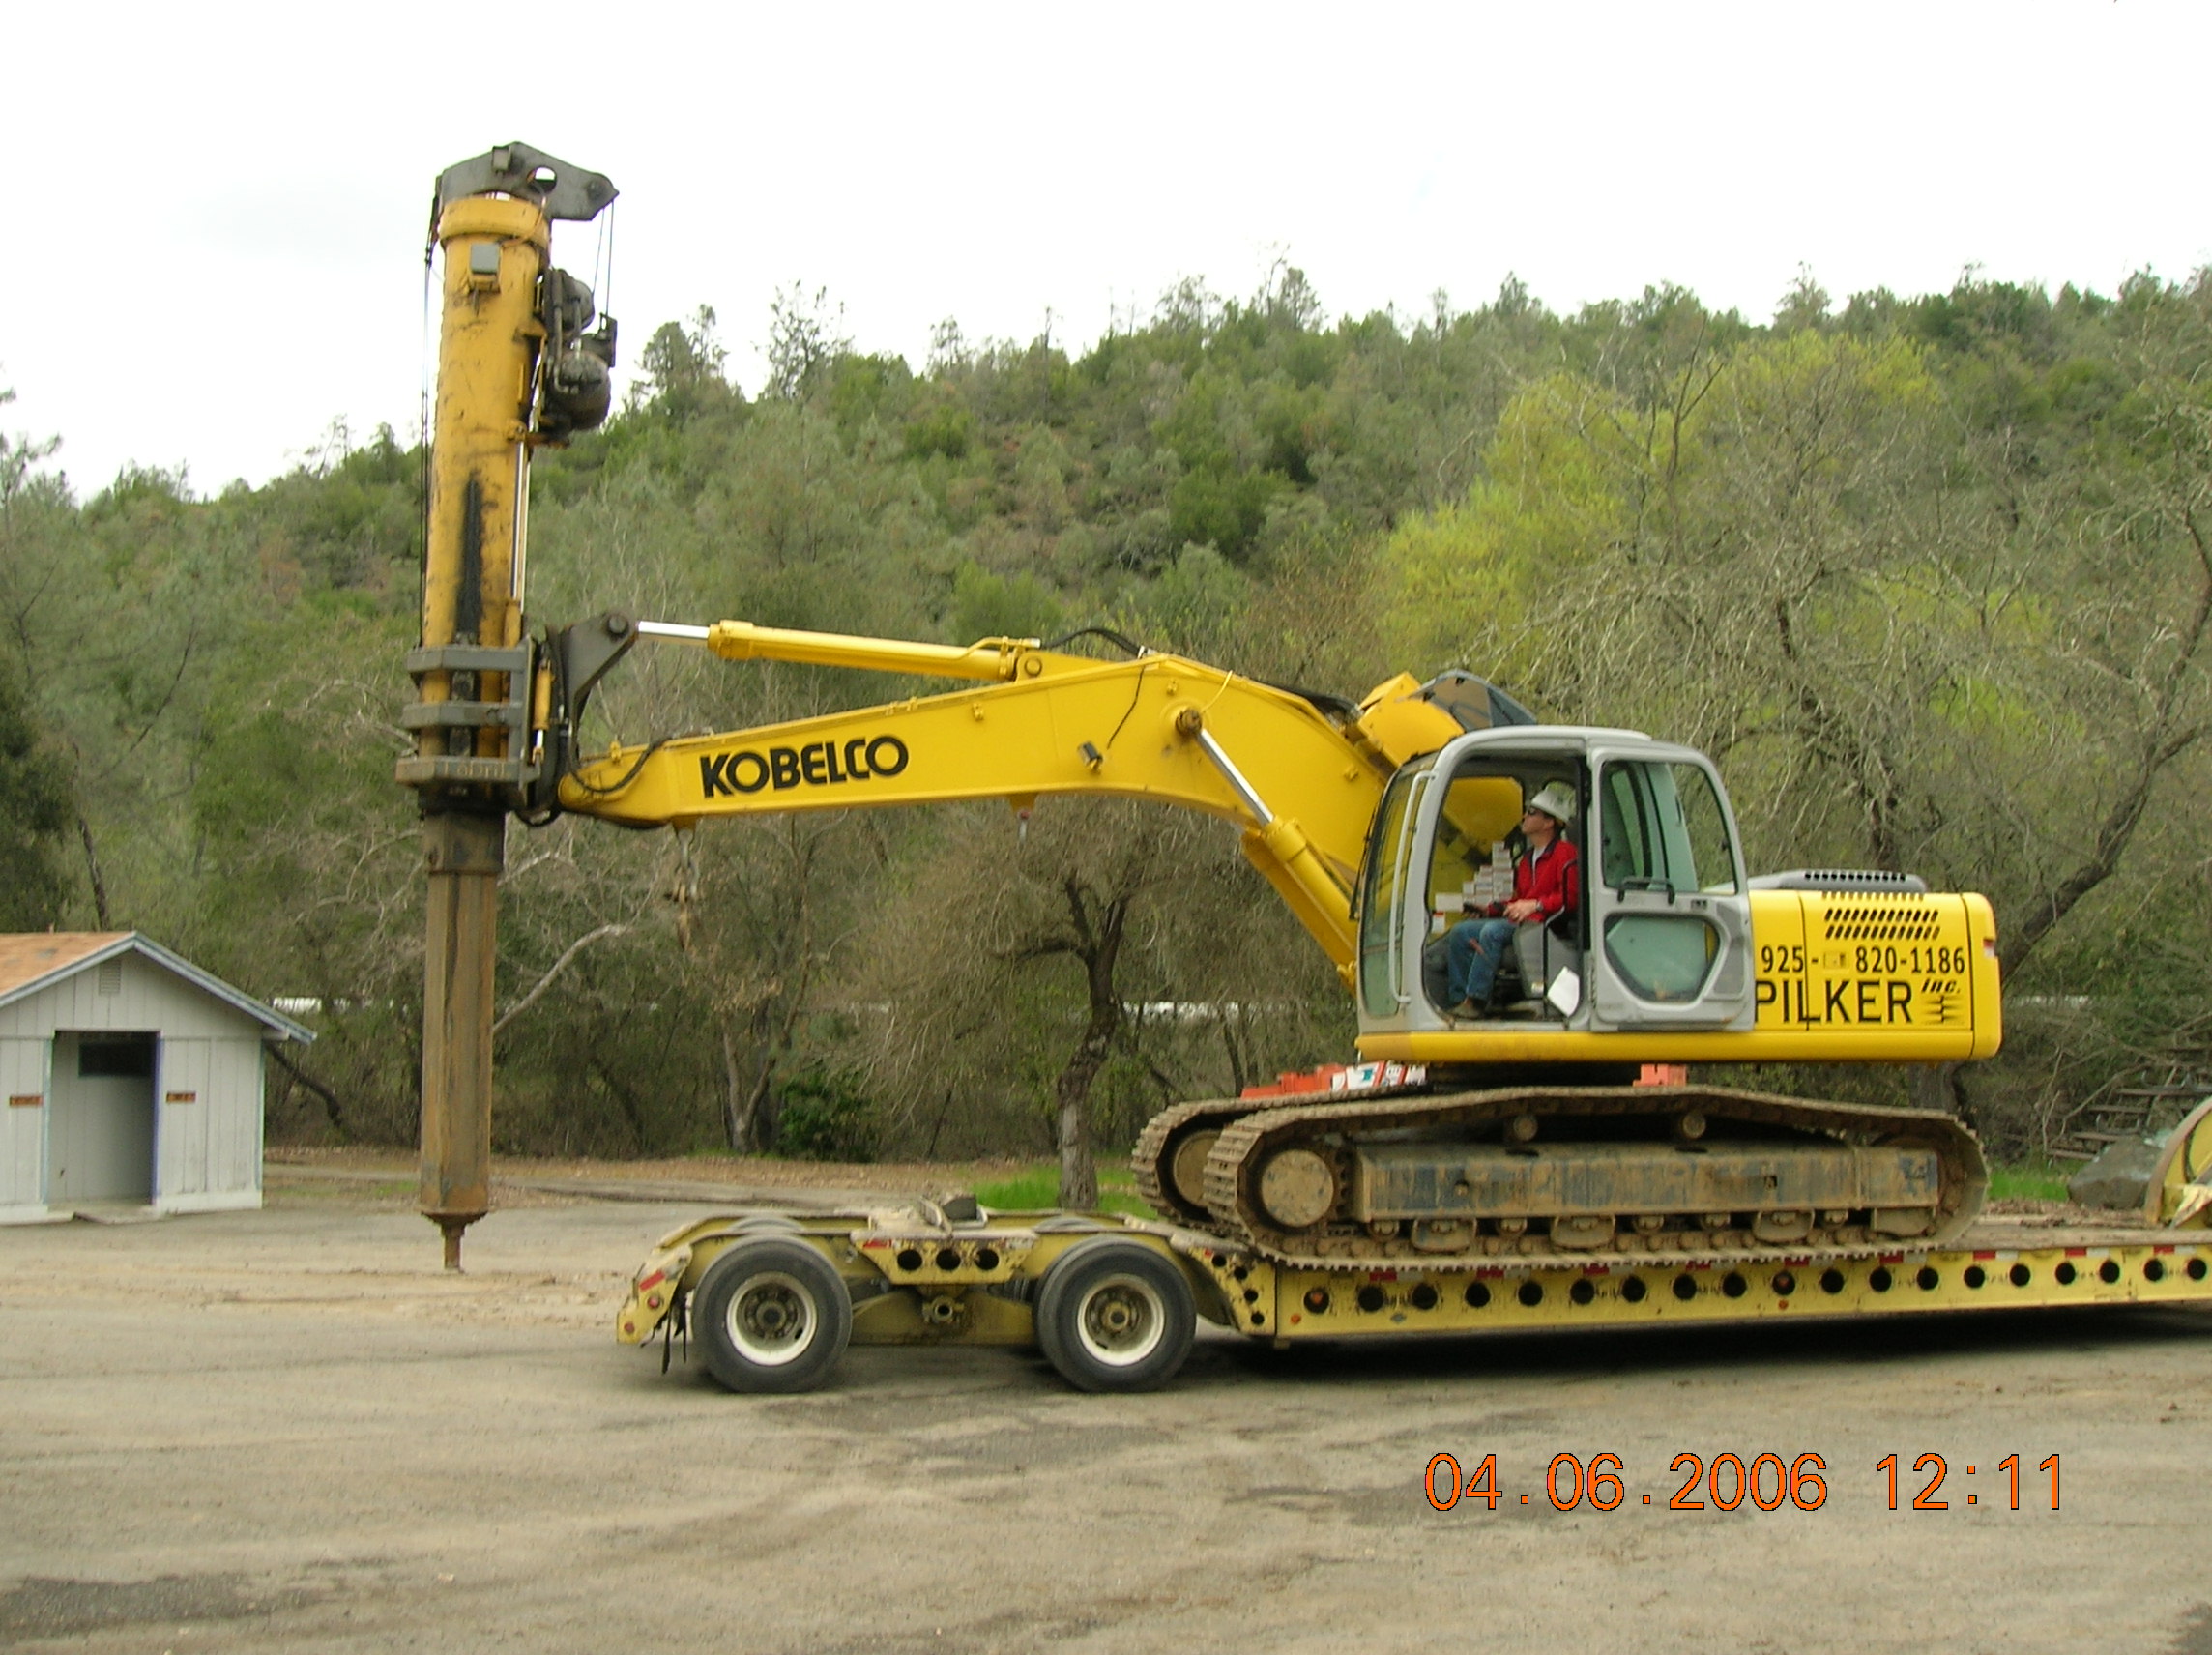 Copy of Pile driving equipment